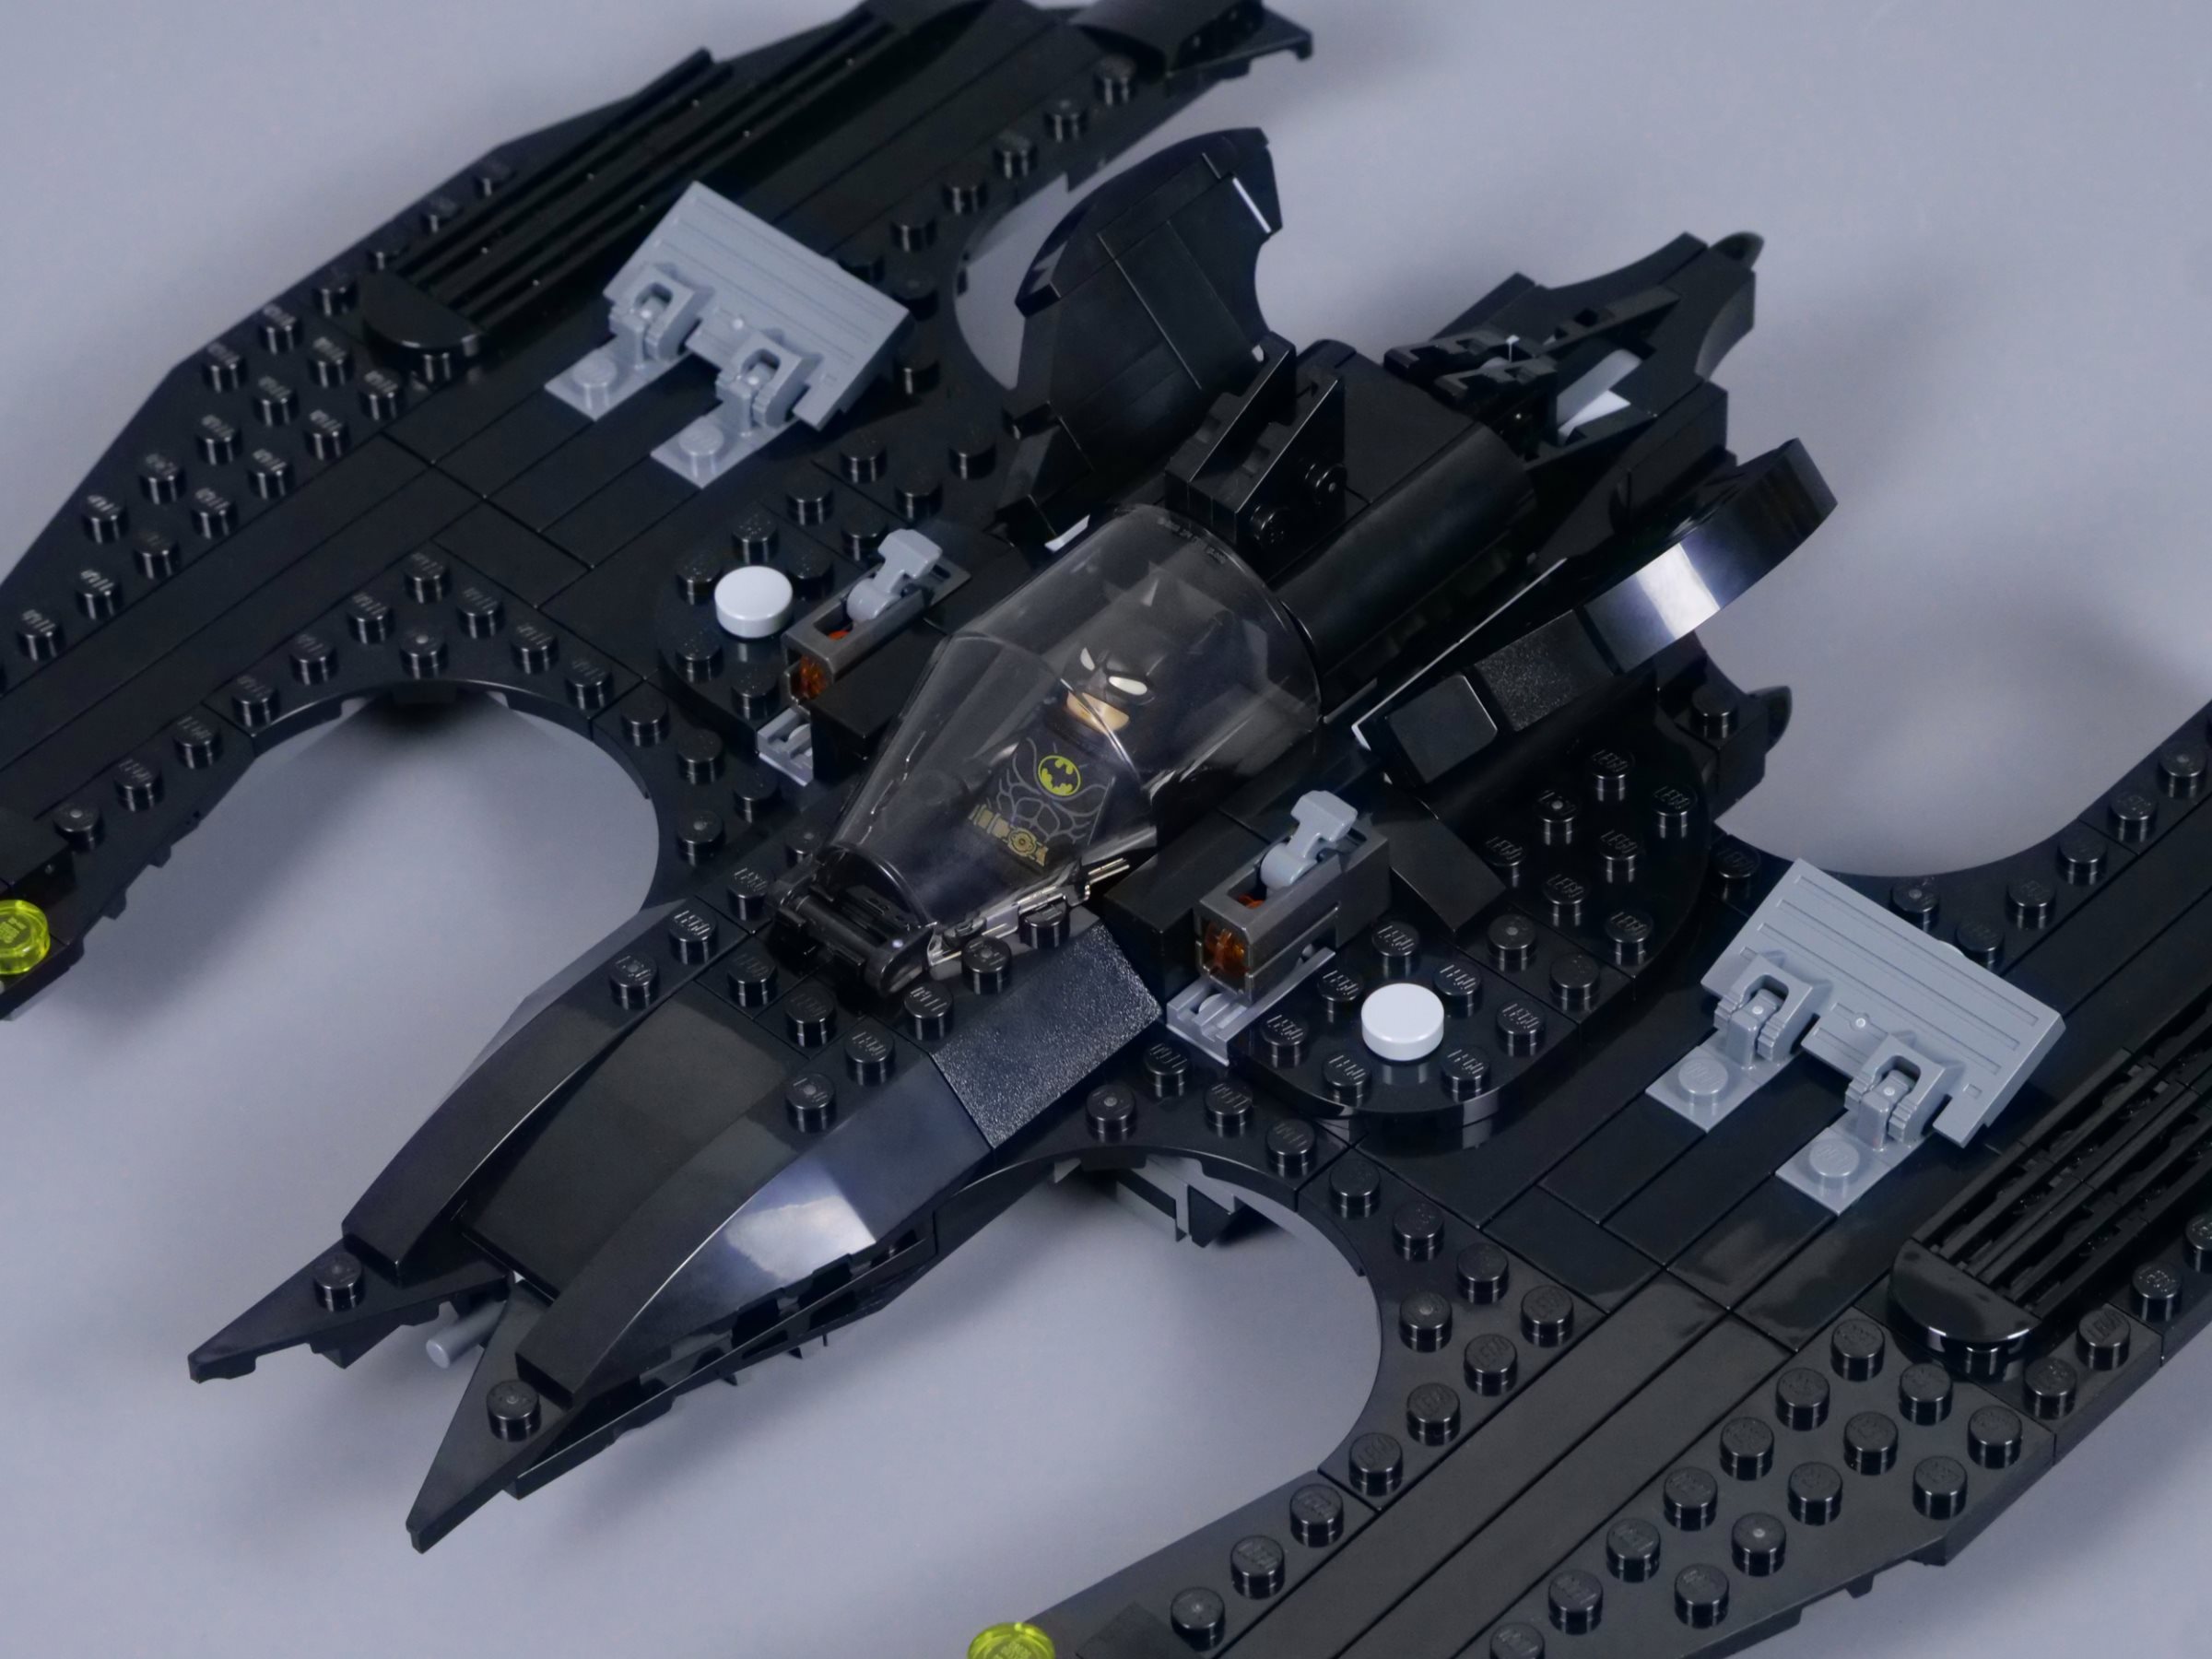 LEGO 1989 Batwing 76265 Set Review What are your thoughts on this $38